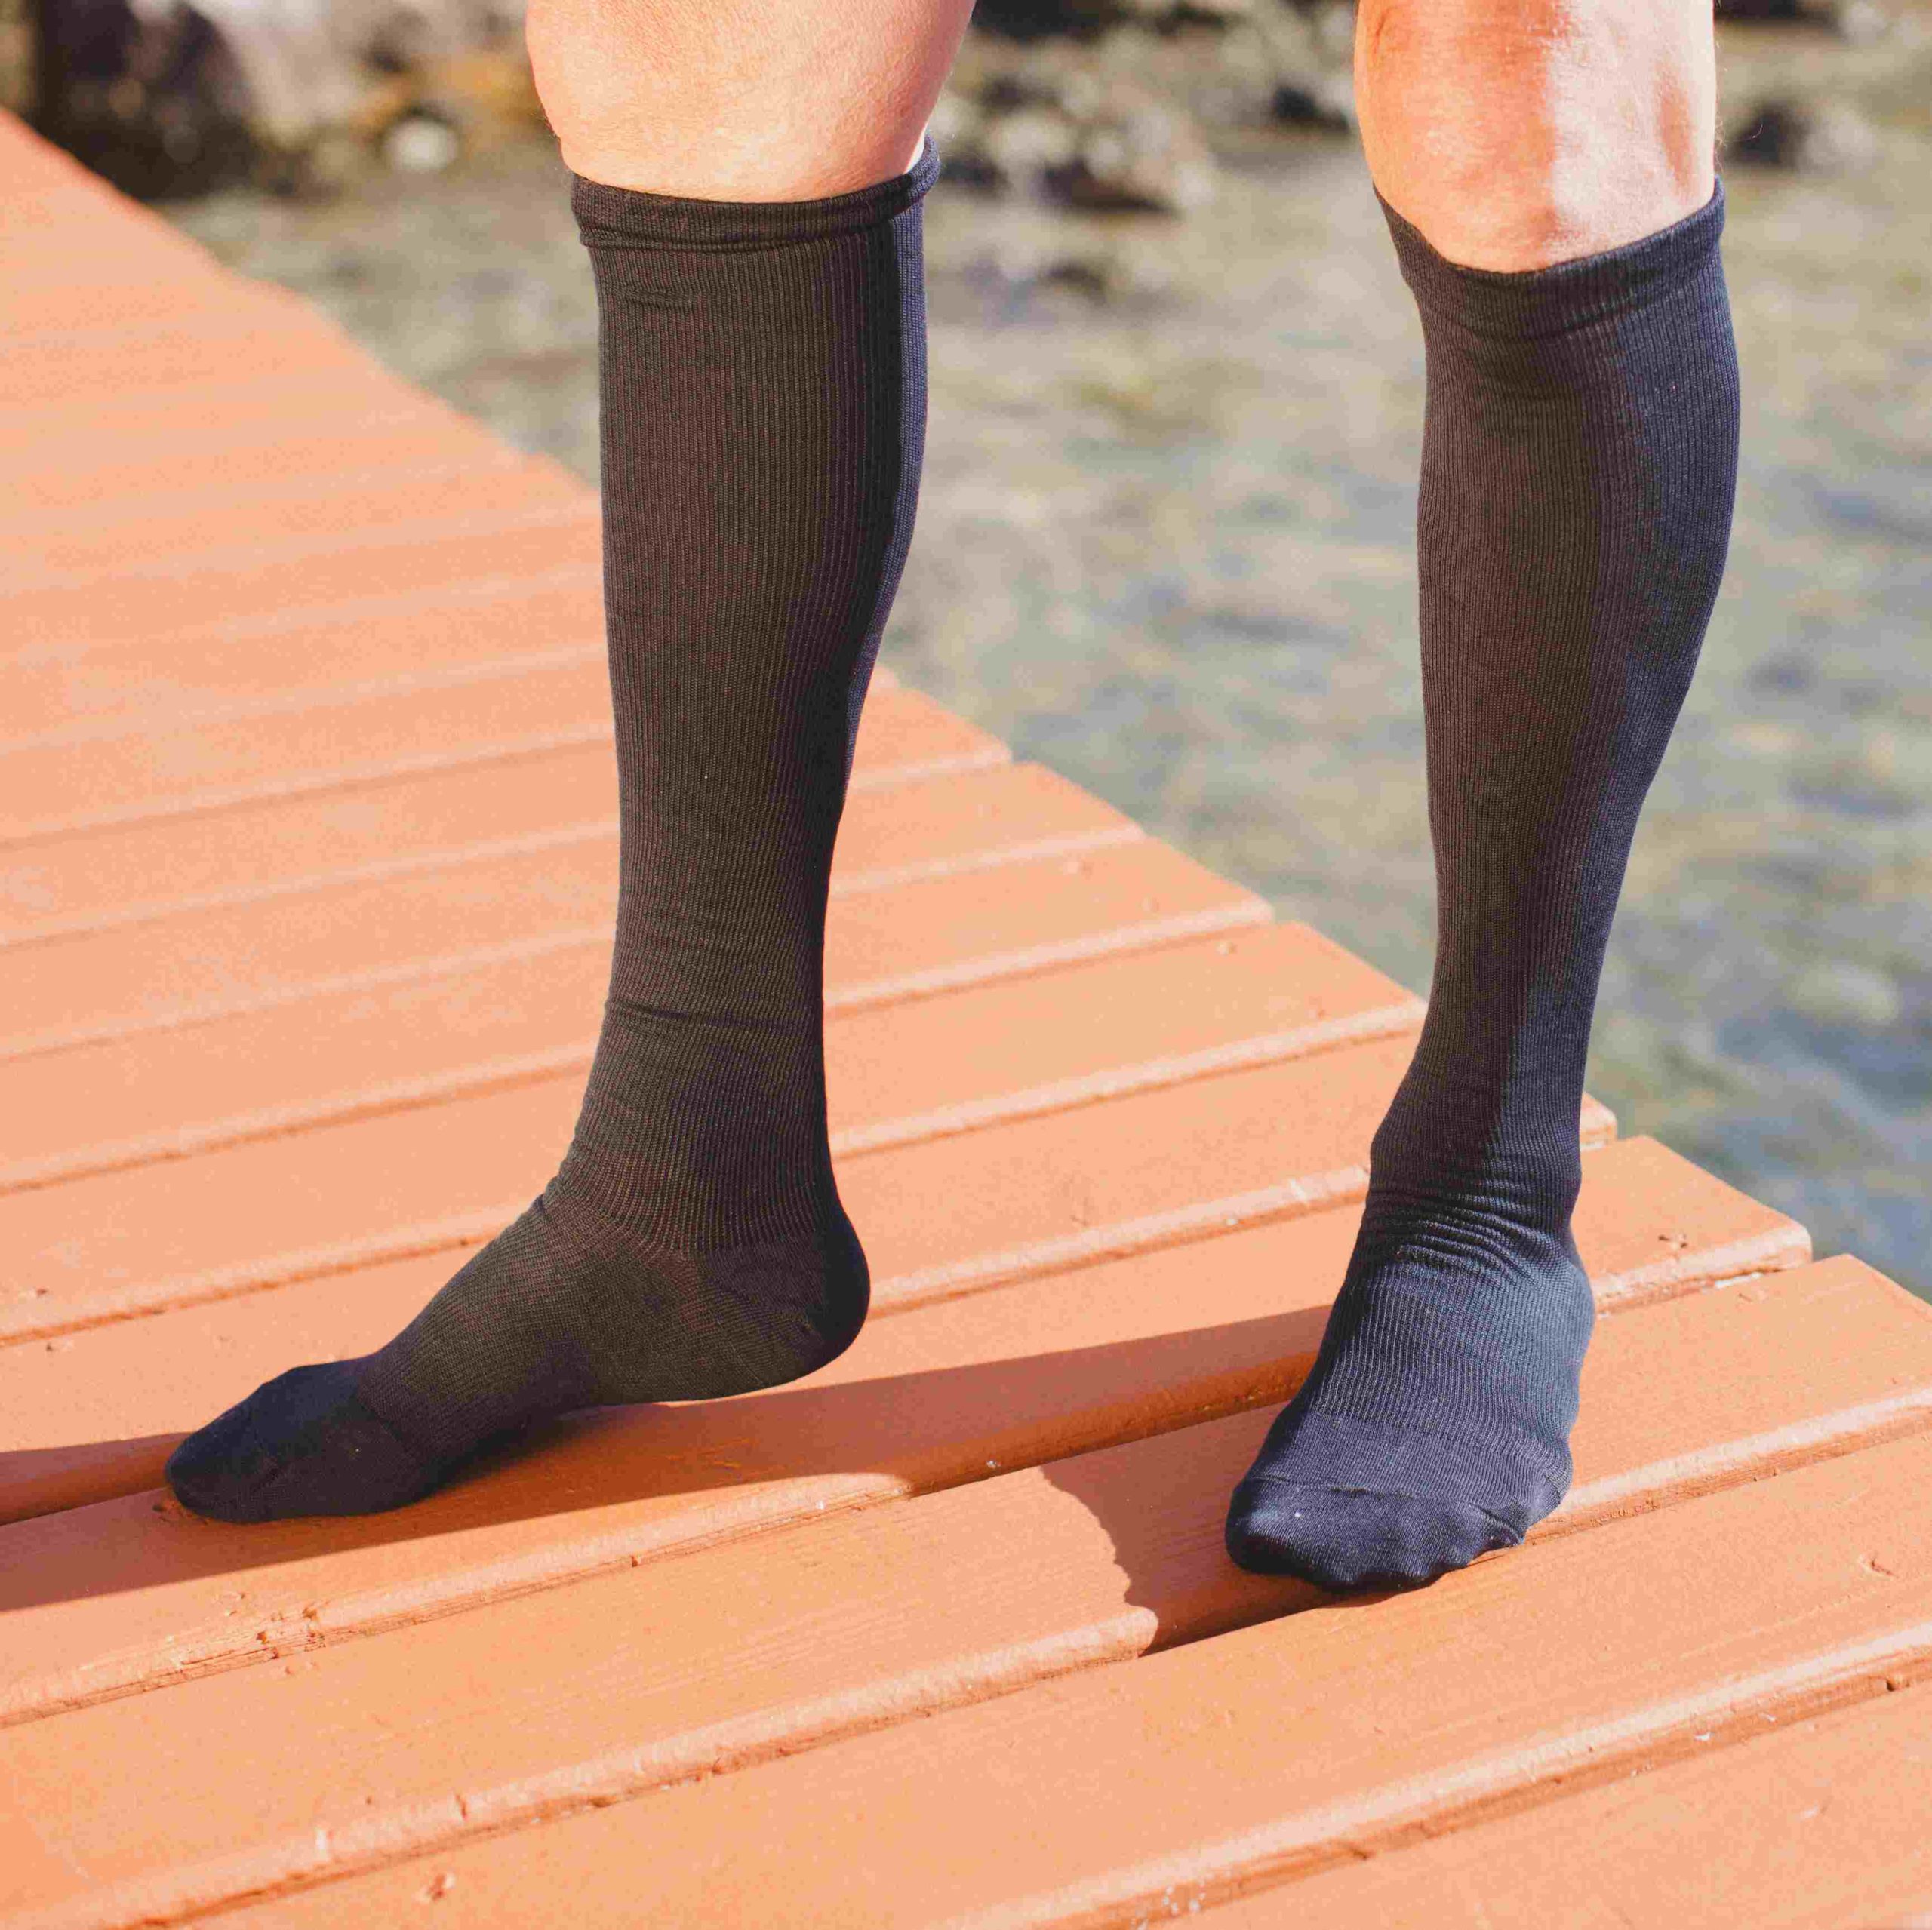 Compression stockings slip or are too tight. What can you do about it?